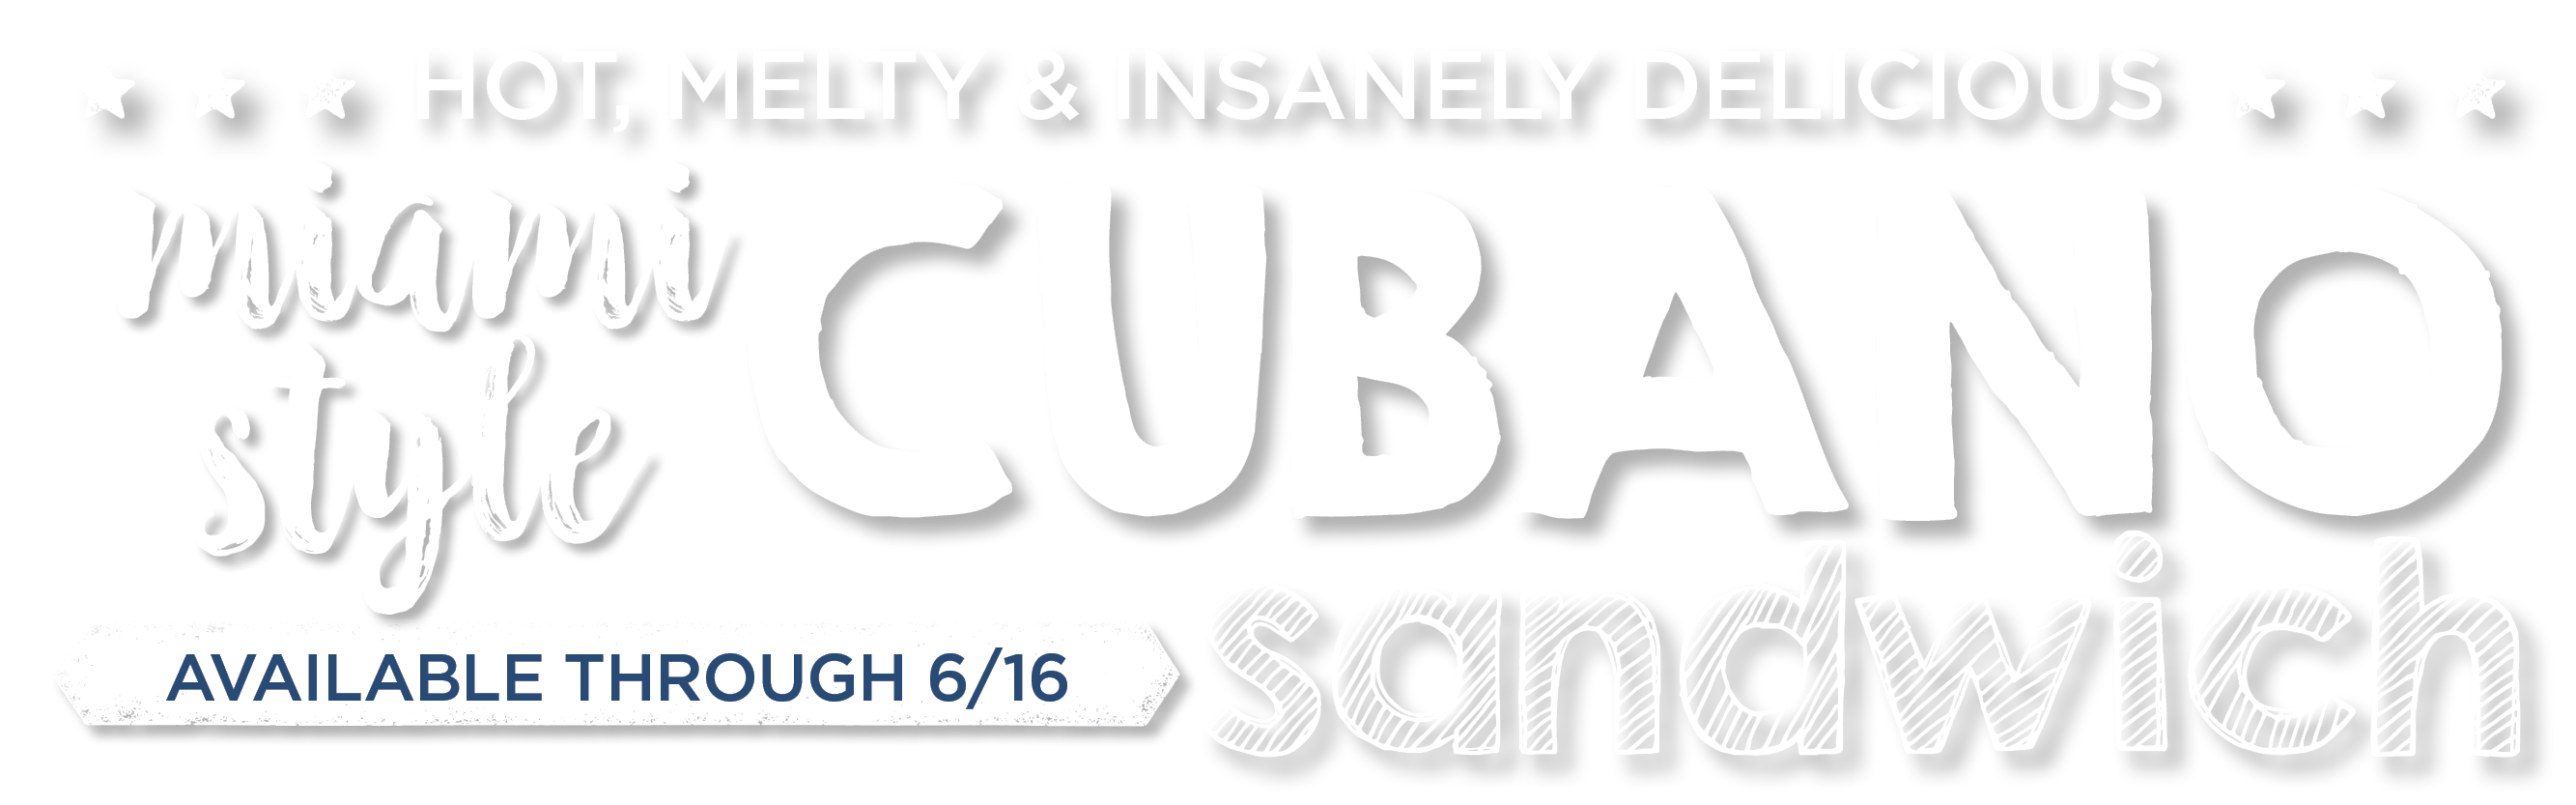 Hot, melty & insanely delicious. Miami-style Cubano Sandwich. Available through 6/16. 